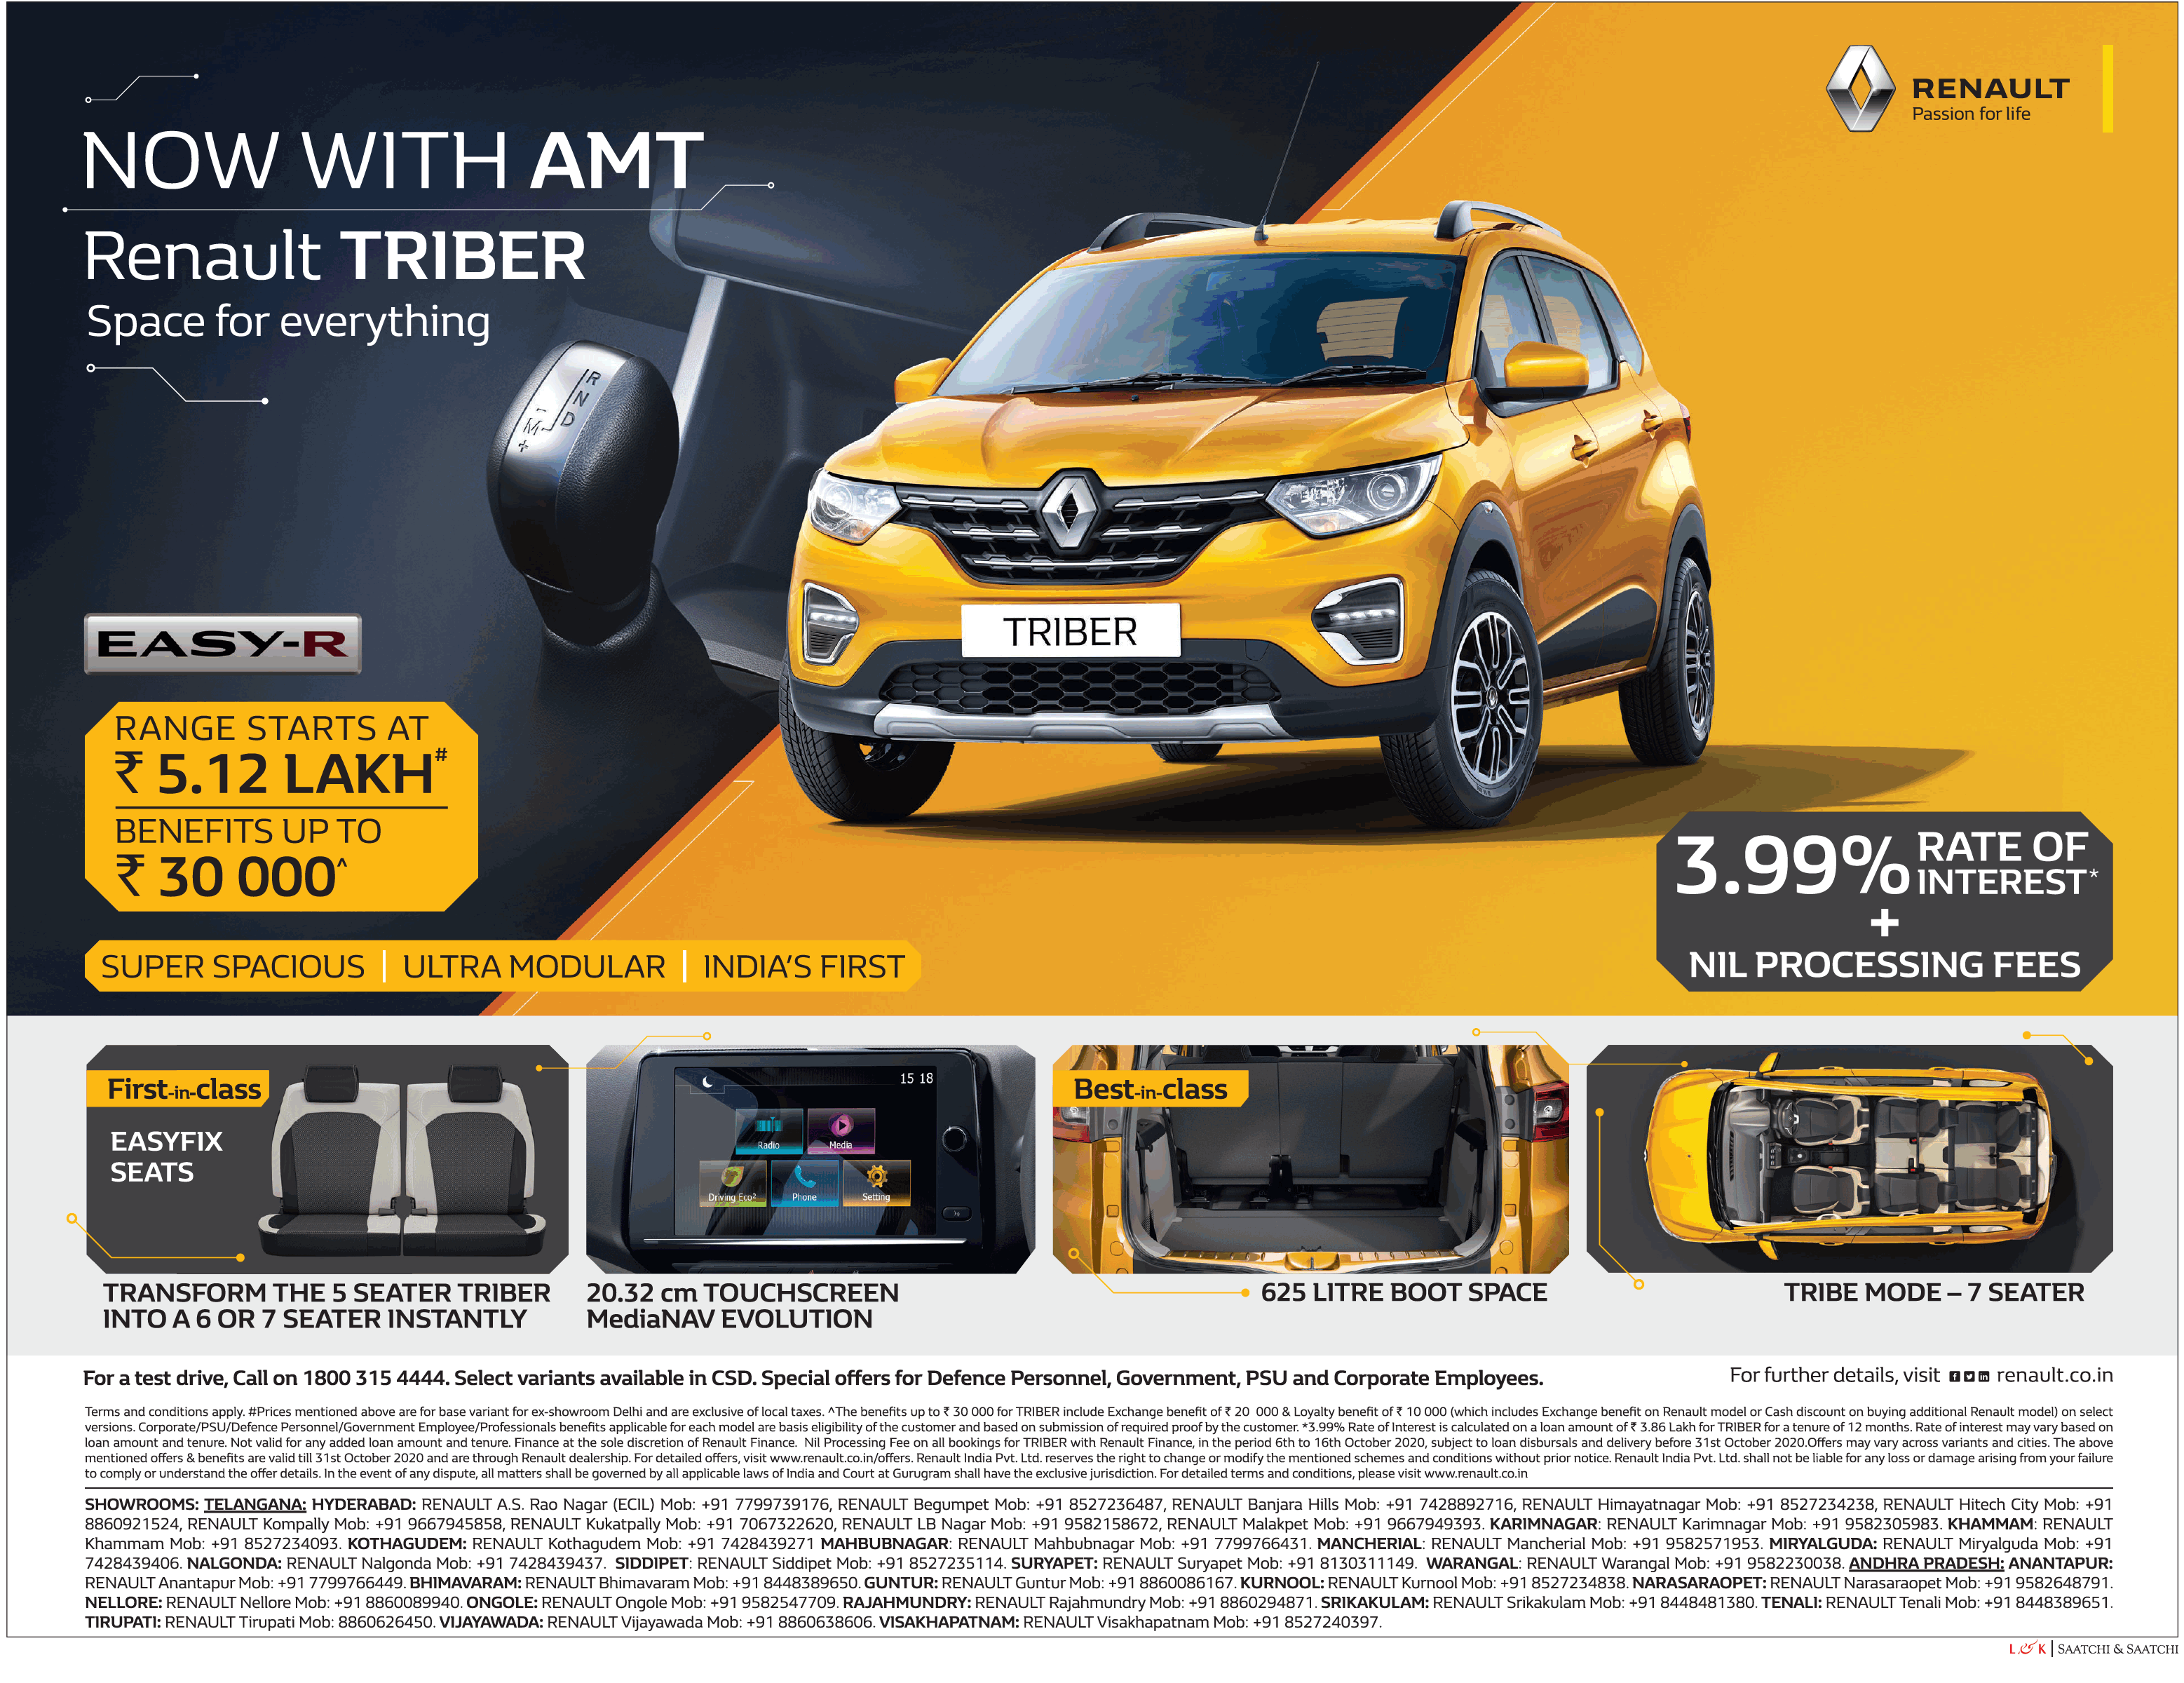 renault-tiber-now-with-amt-ad-toi-hyderabad-8-10-2020